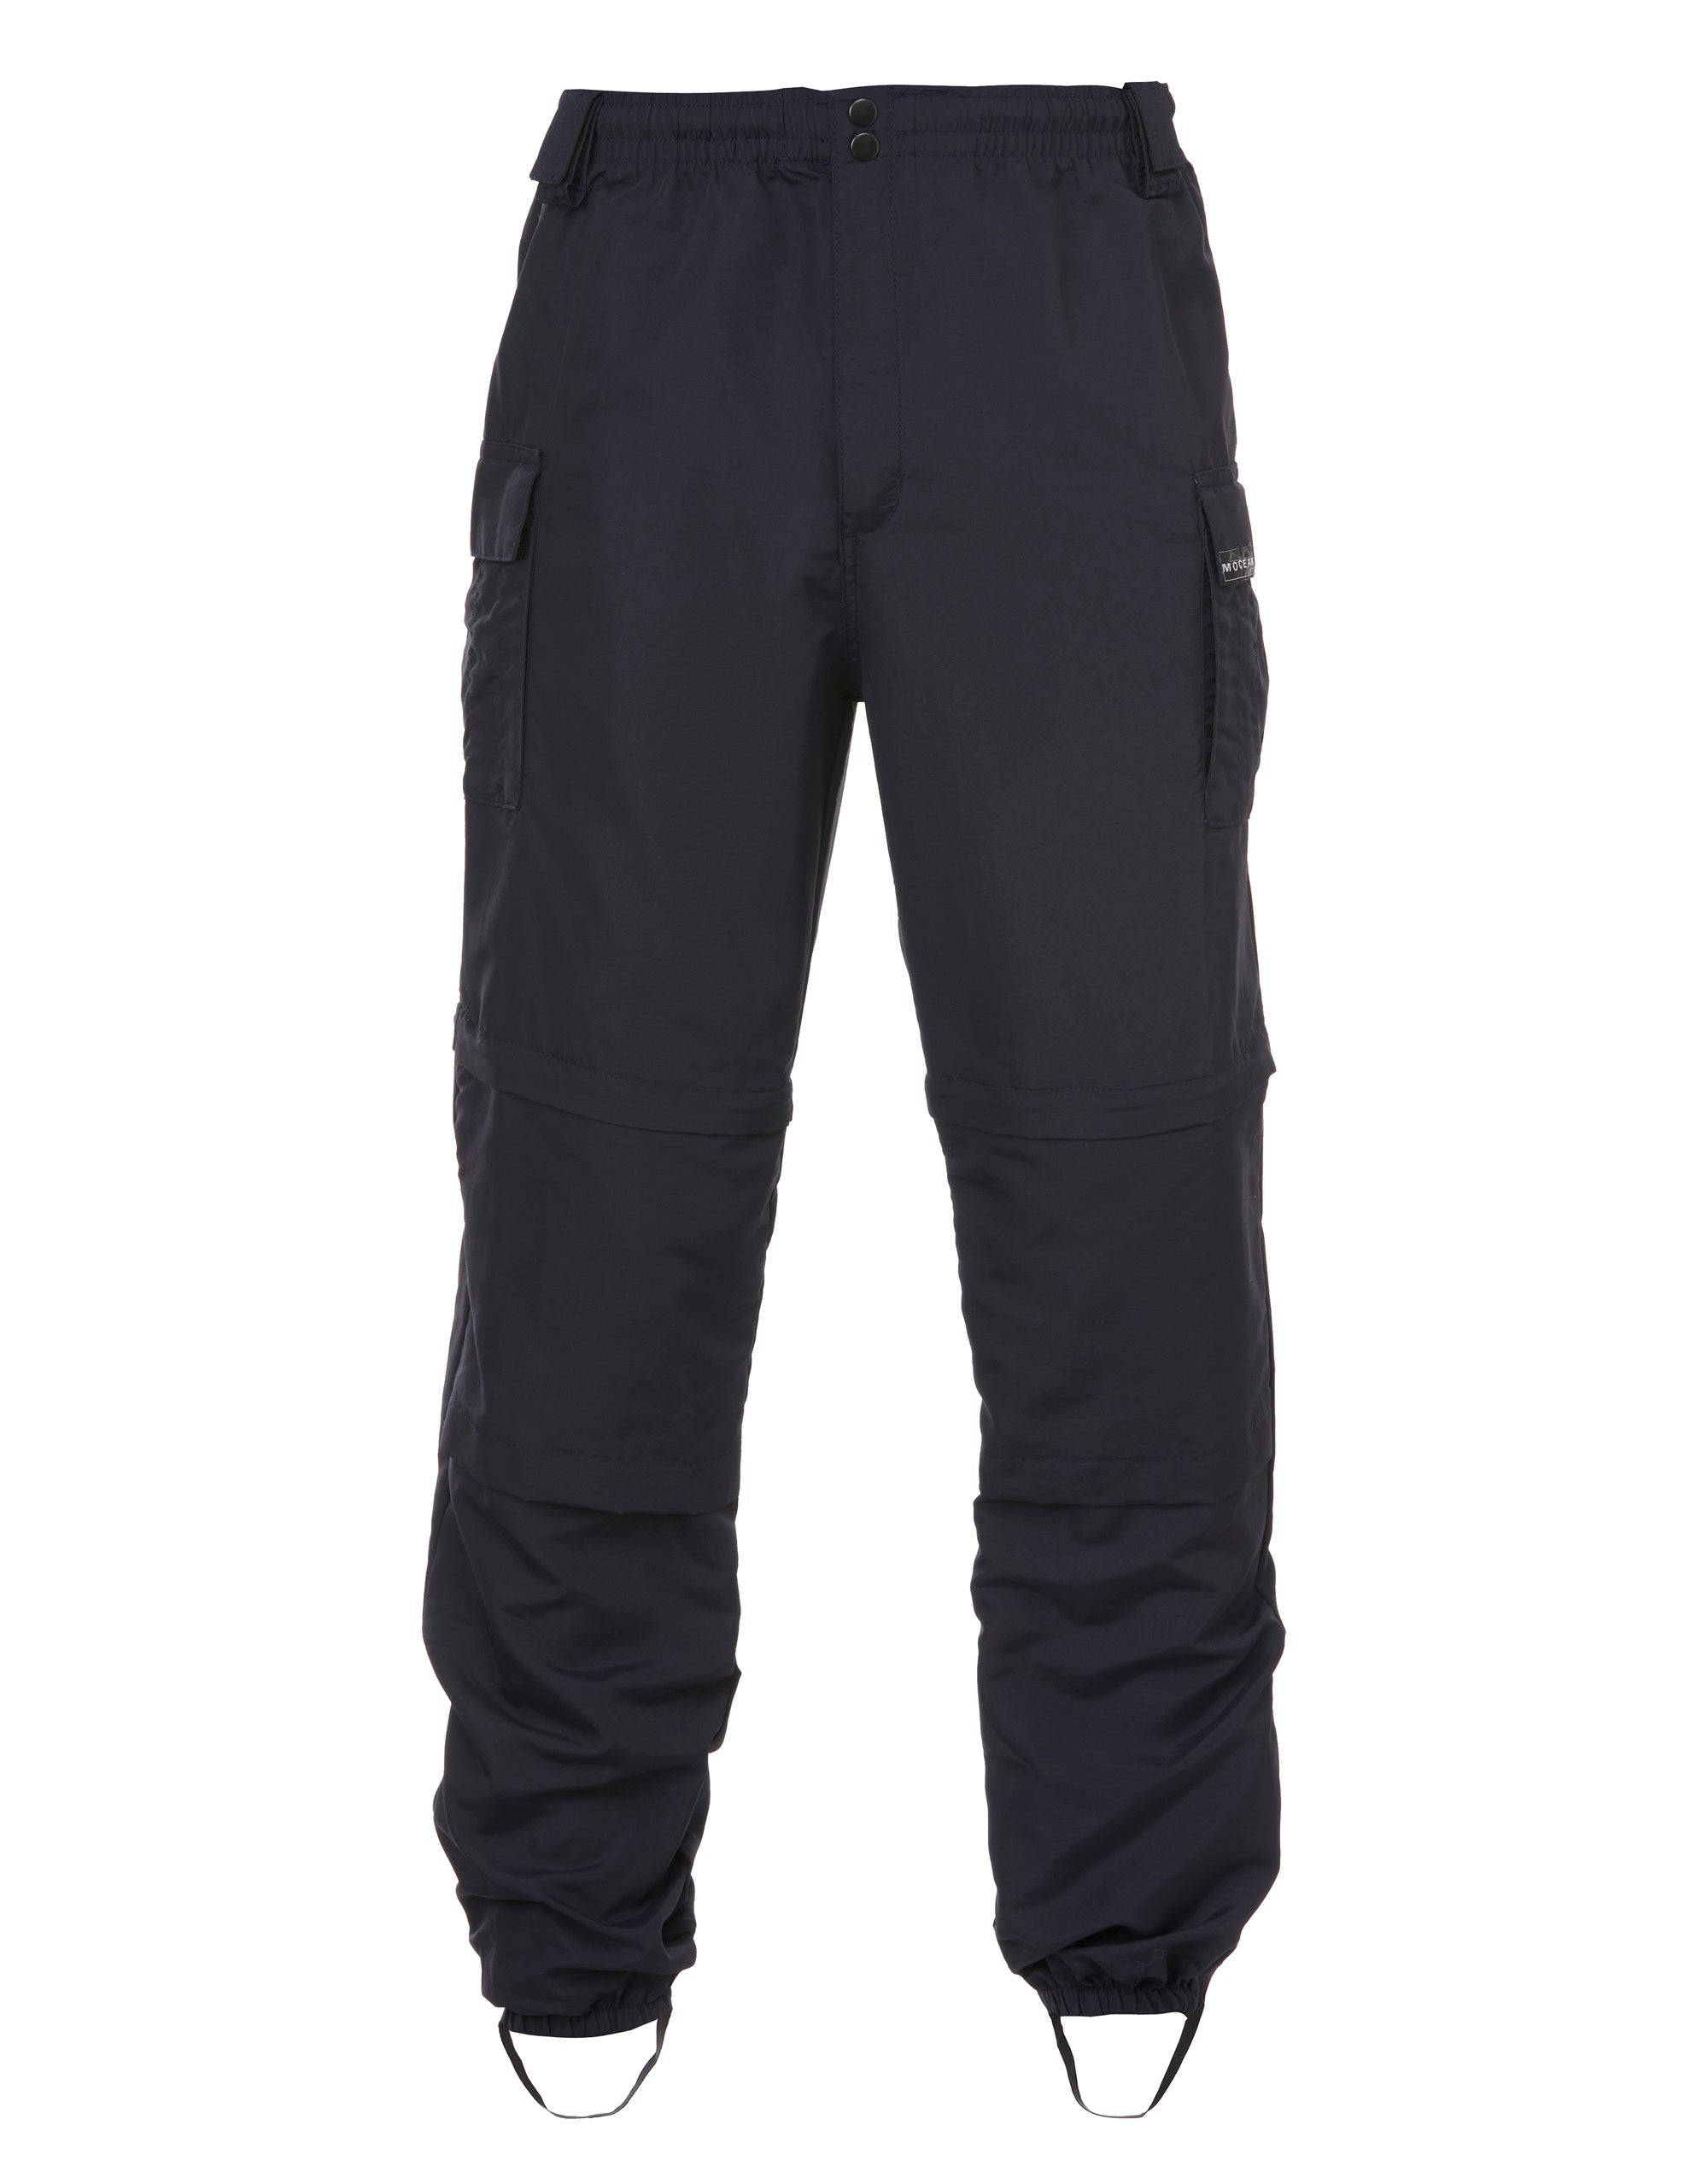 2088Z Zip-Off Pant with Stirrups